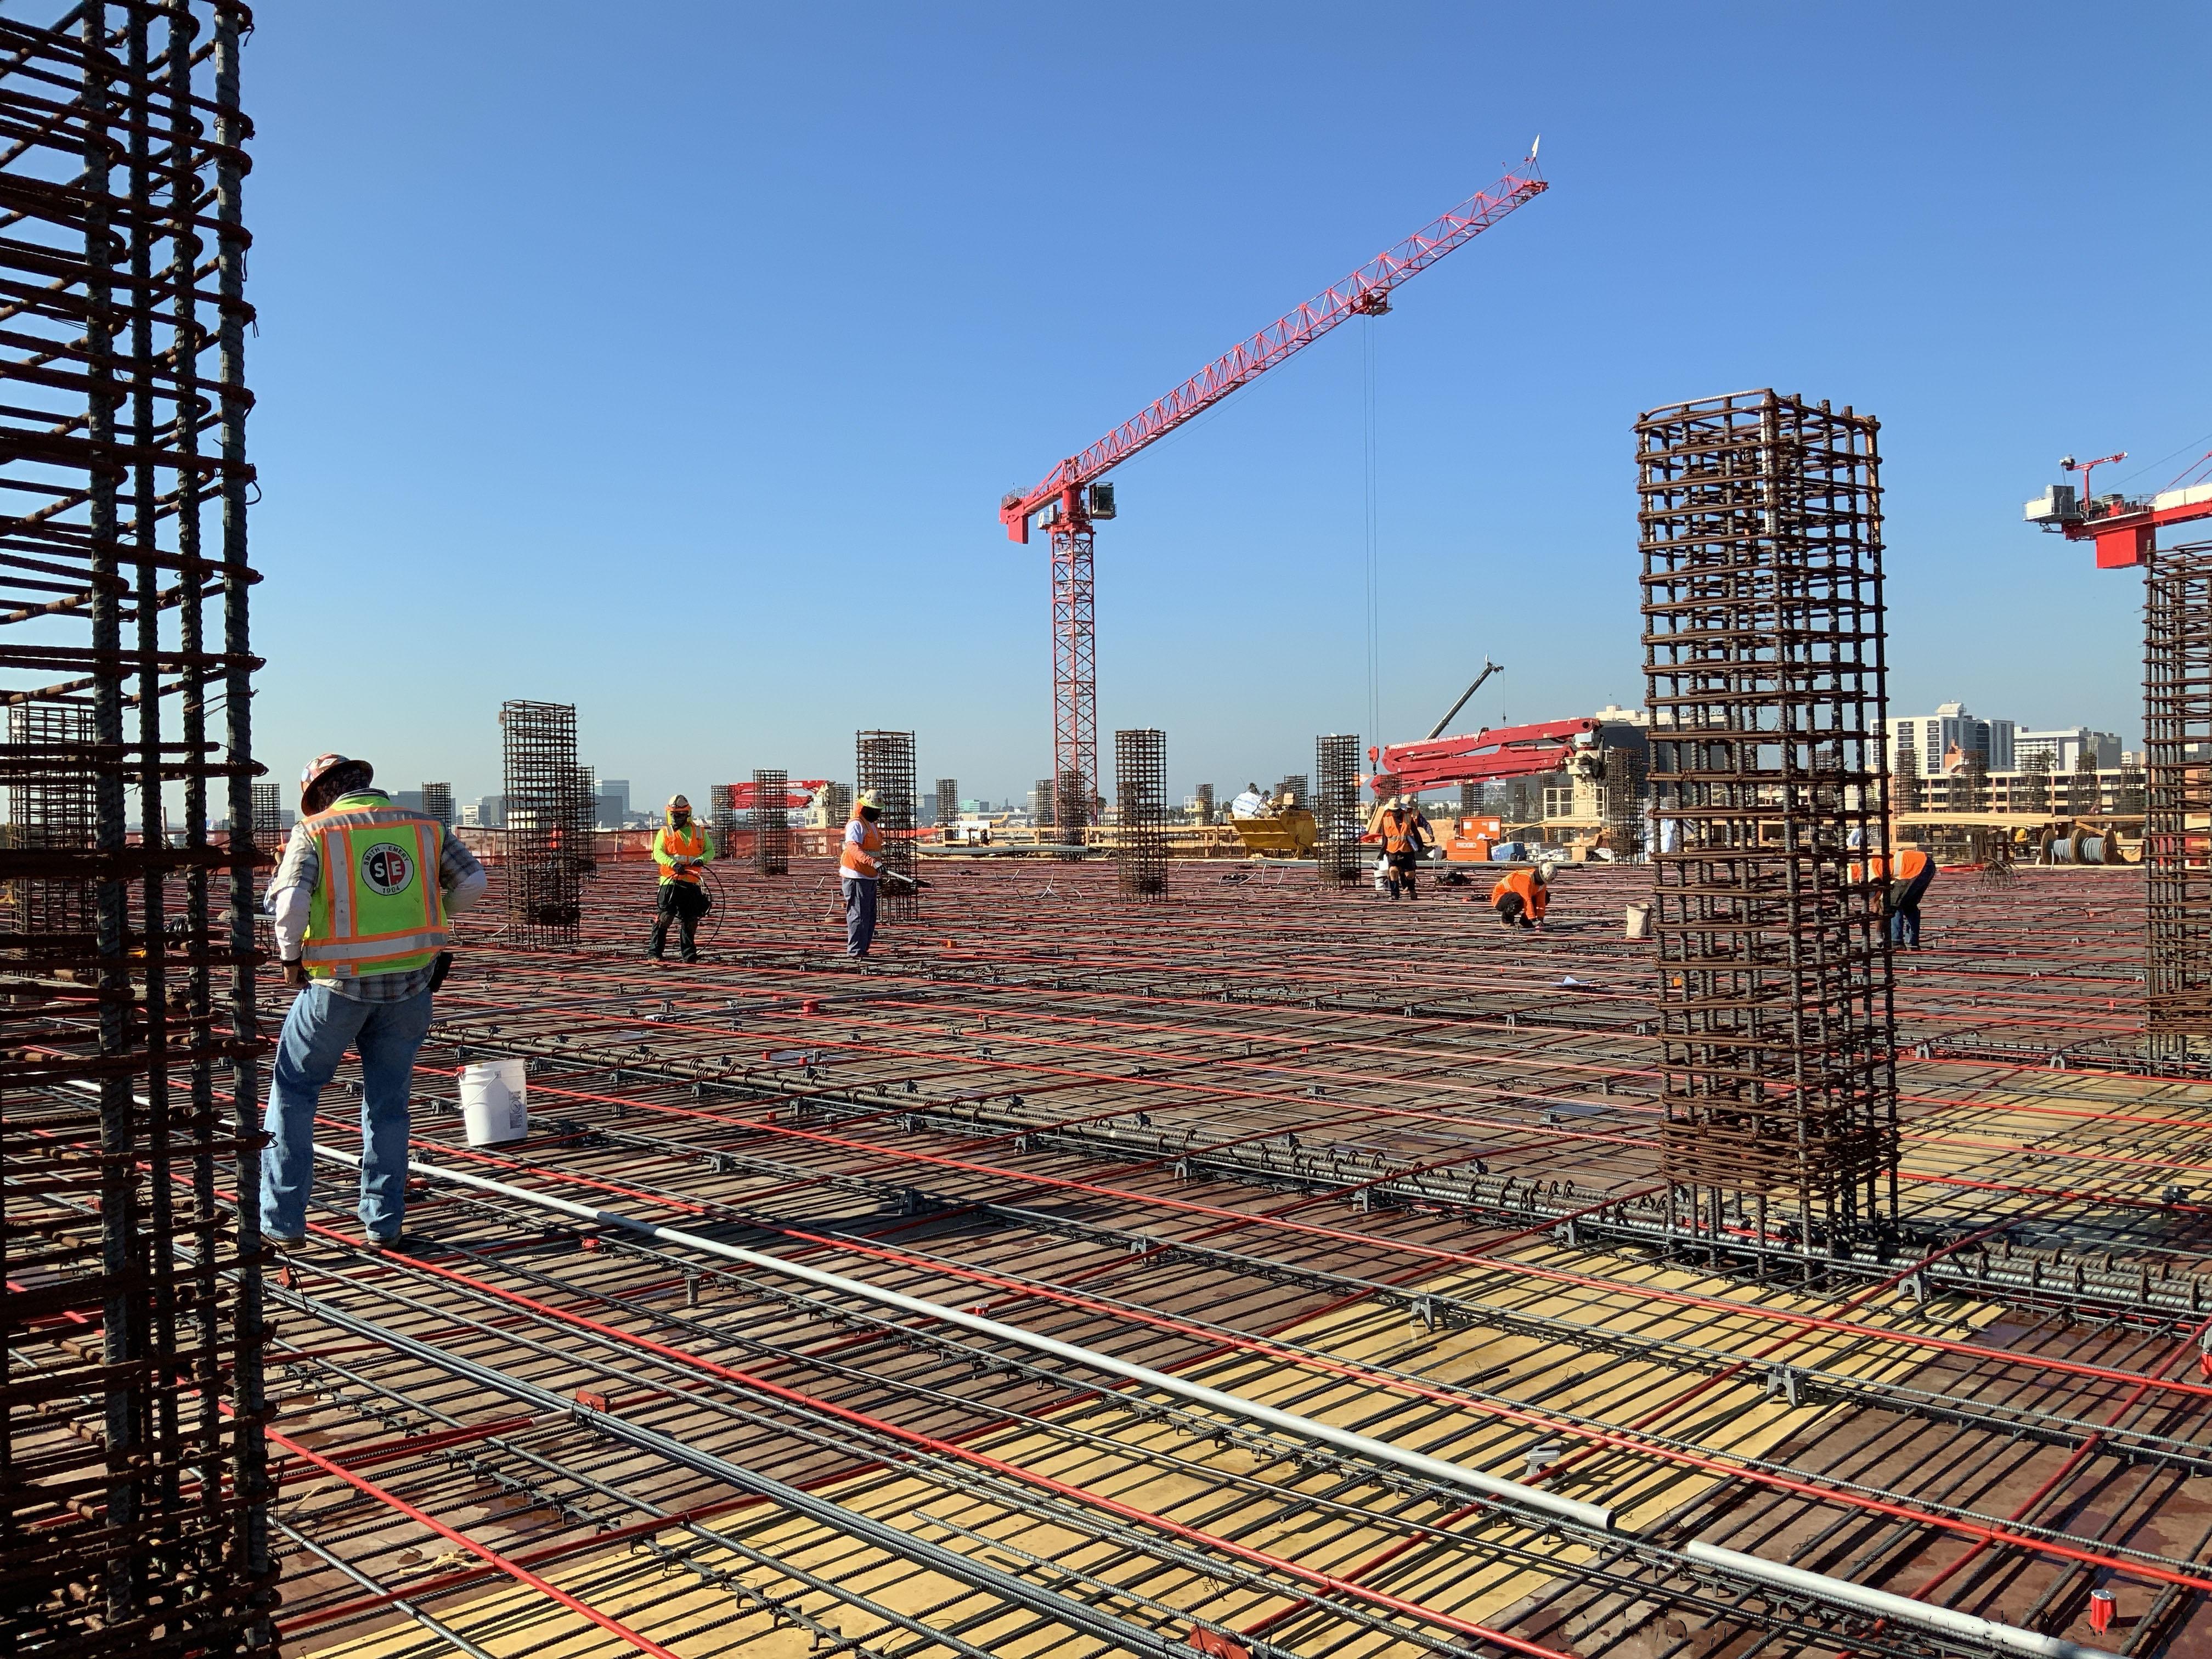 Electricians and iron workers fine tuning the conduits and rebar for the deck the day before a Level 4 deck pour at the Consolidated Rent-A-Car (ConRAC) Facility Ready Return (RR) Building.